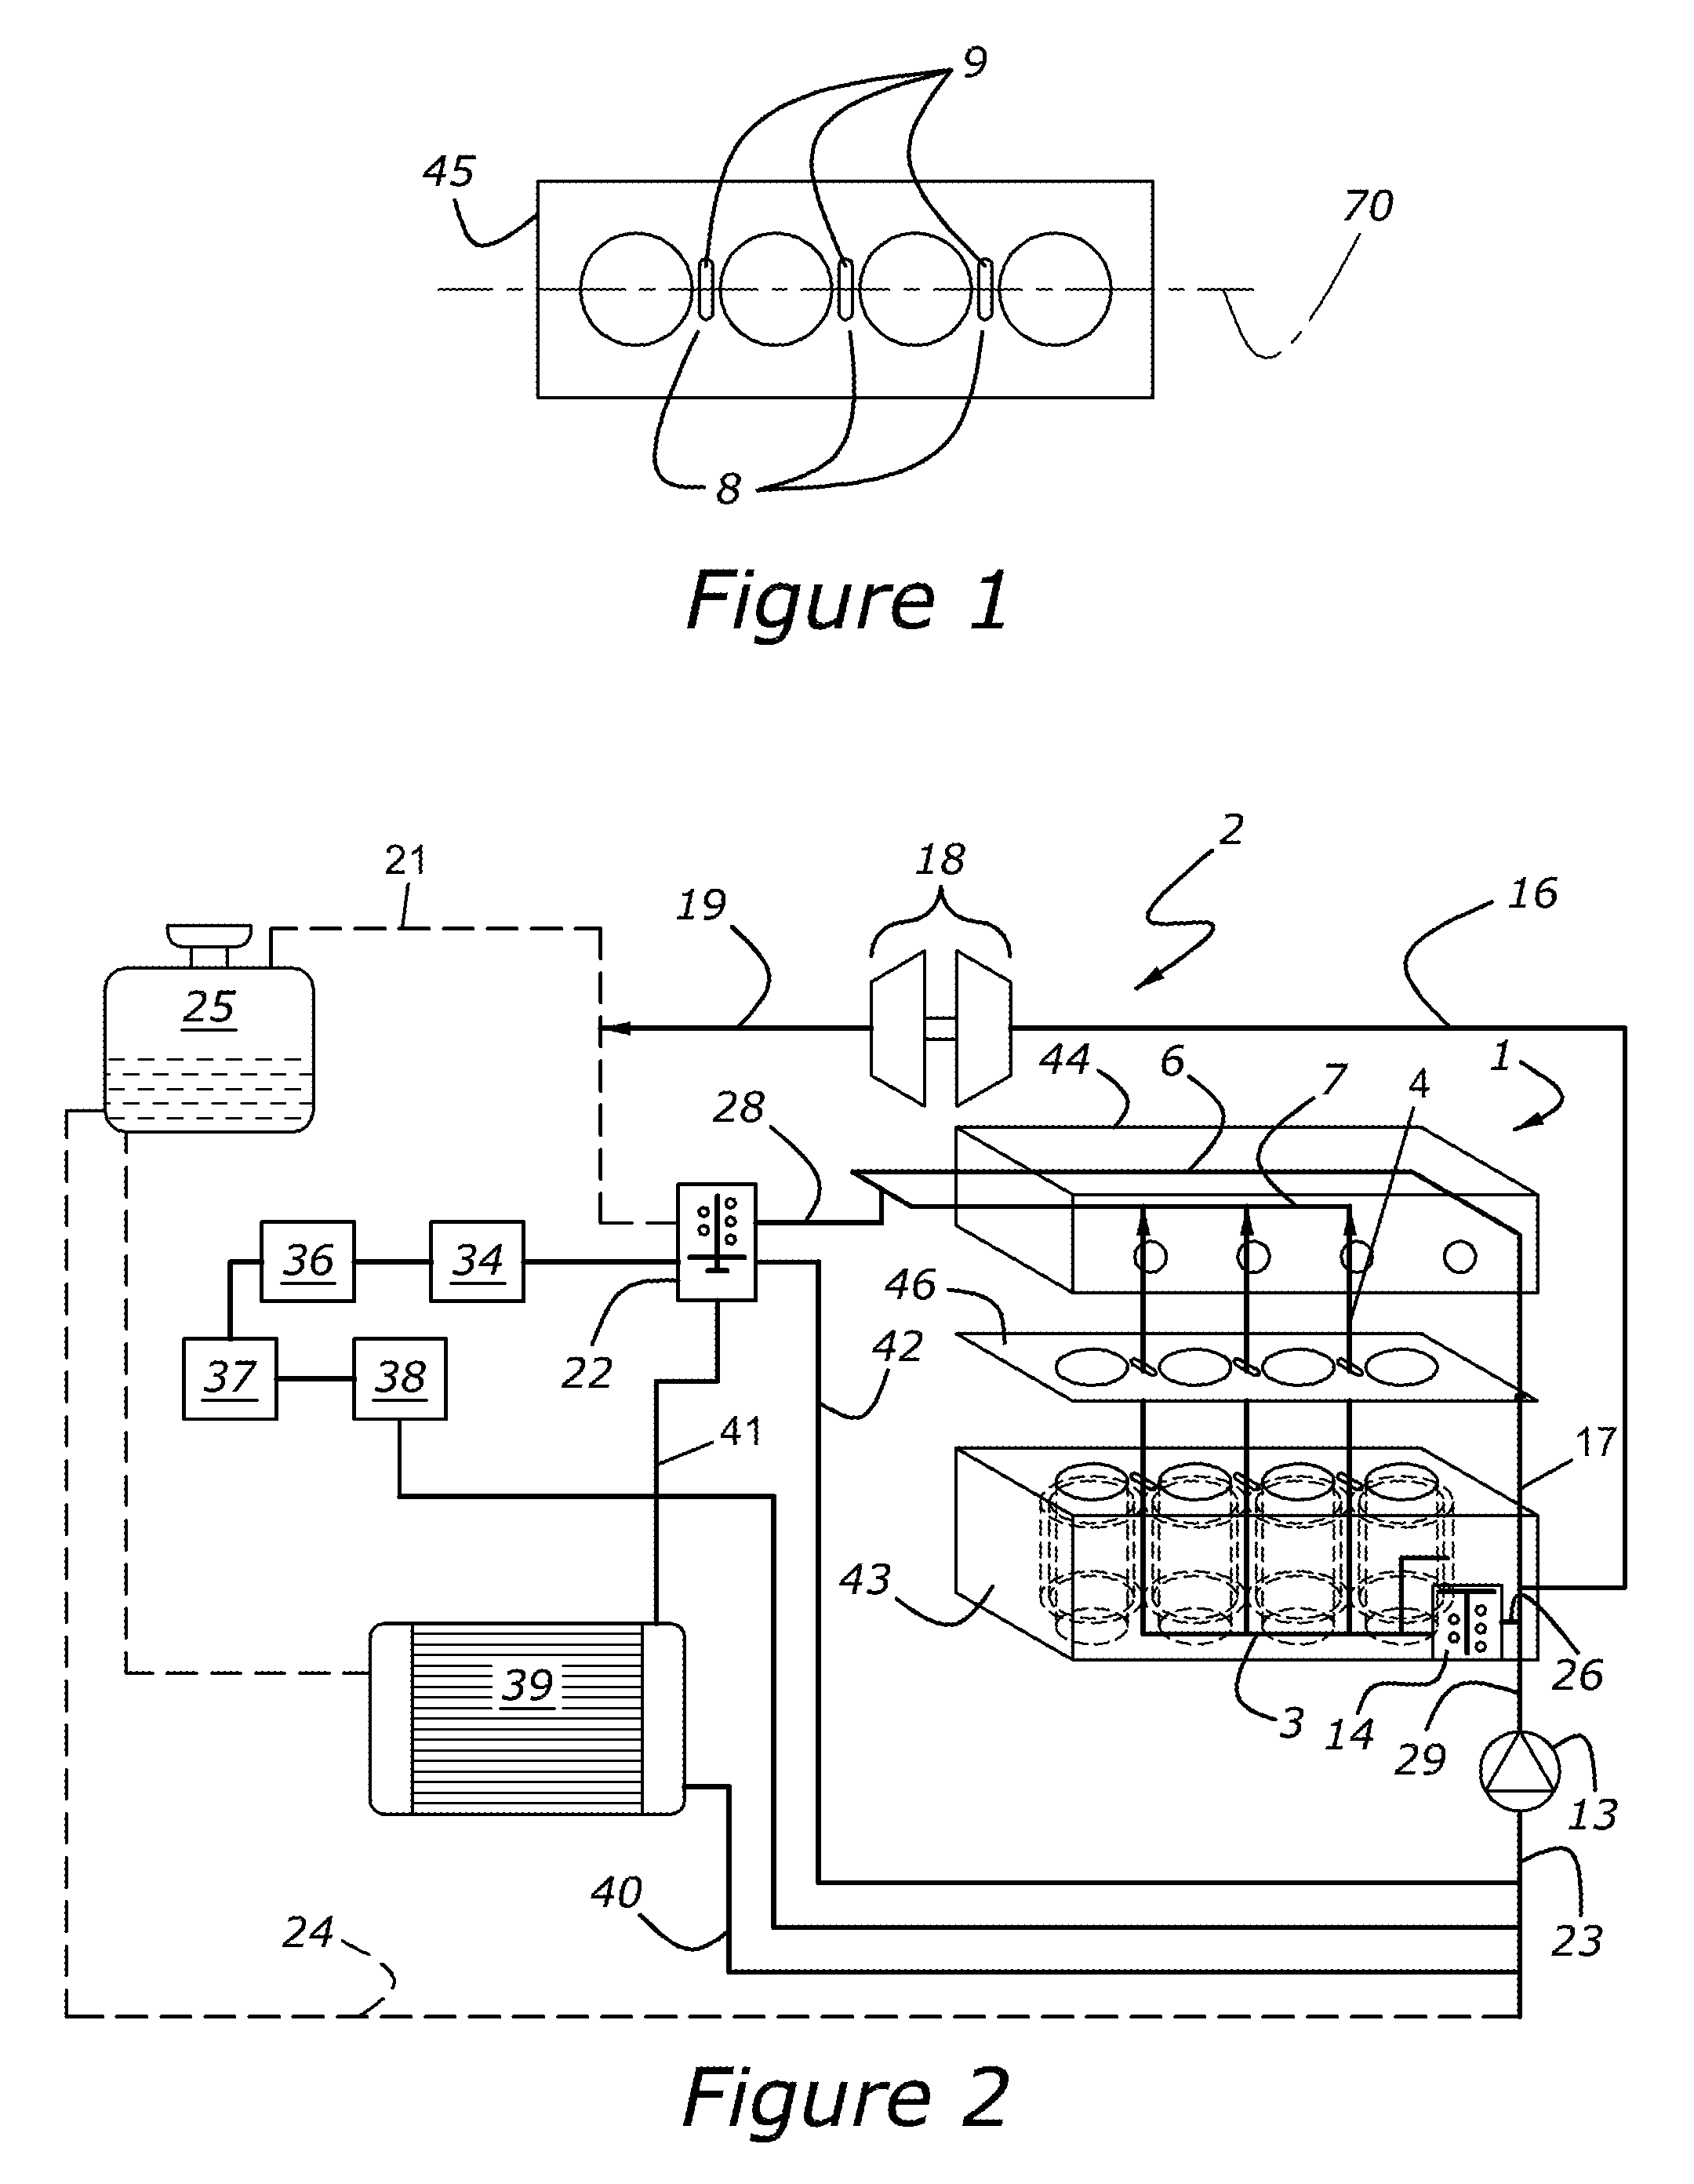 Cooling system defined in a cylinder block of an internal combustion engine